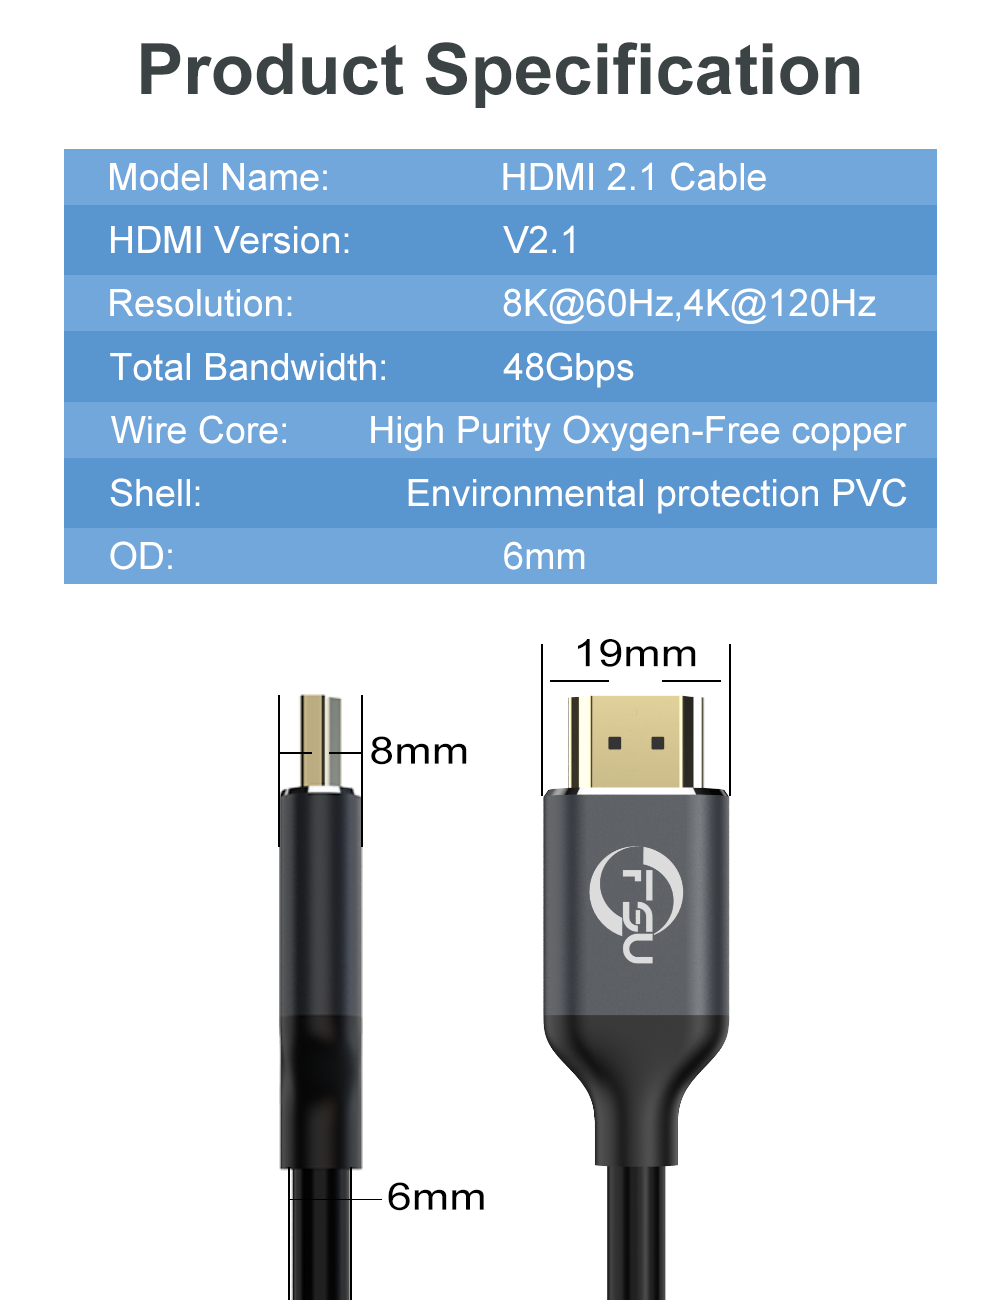 FSU-HDMI-21-Cable-8k60Hz-4K120HZ-48Gbps-HDMI-Cable--for-HDMI-Switch-Splitter-HD-TV-Box-Projector-1782444-10